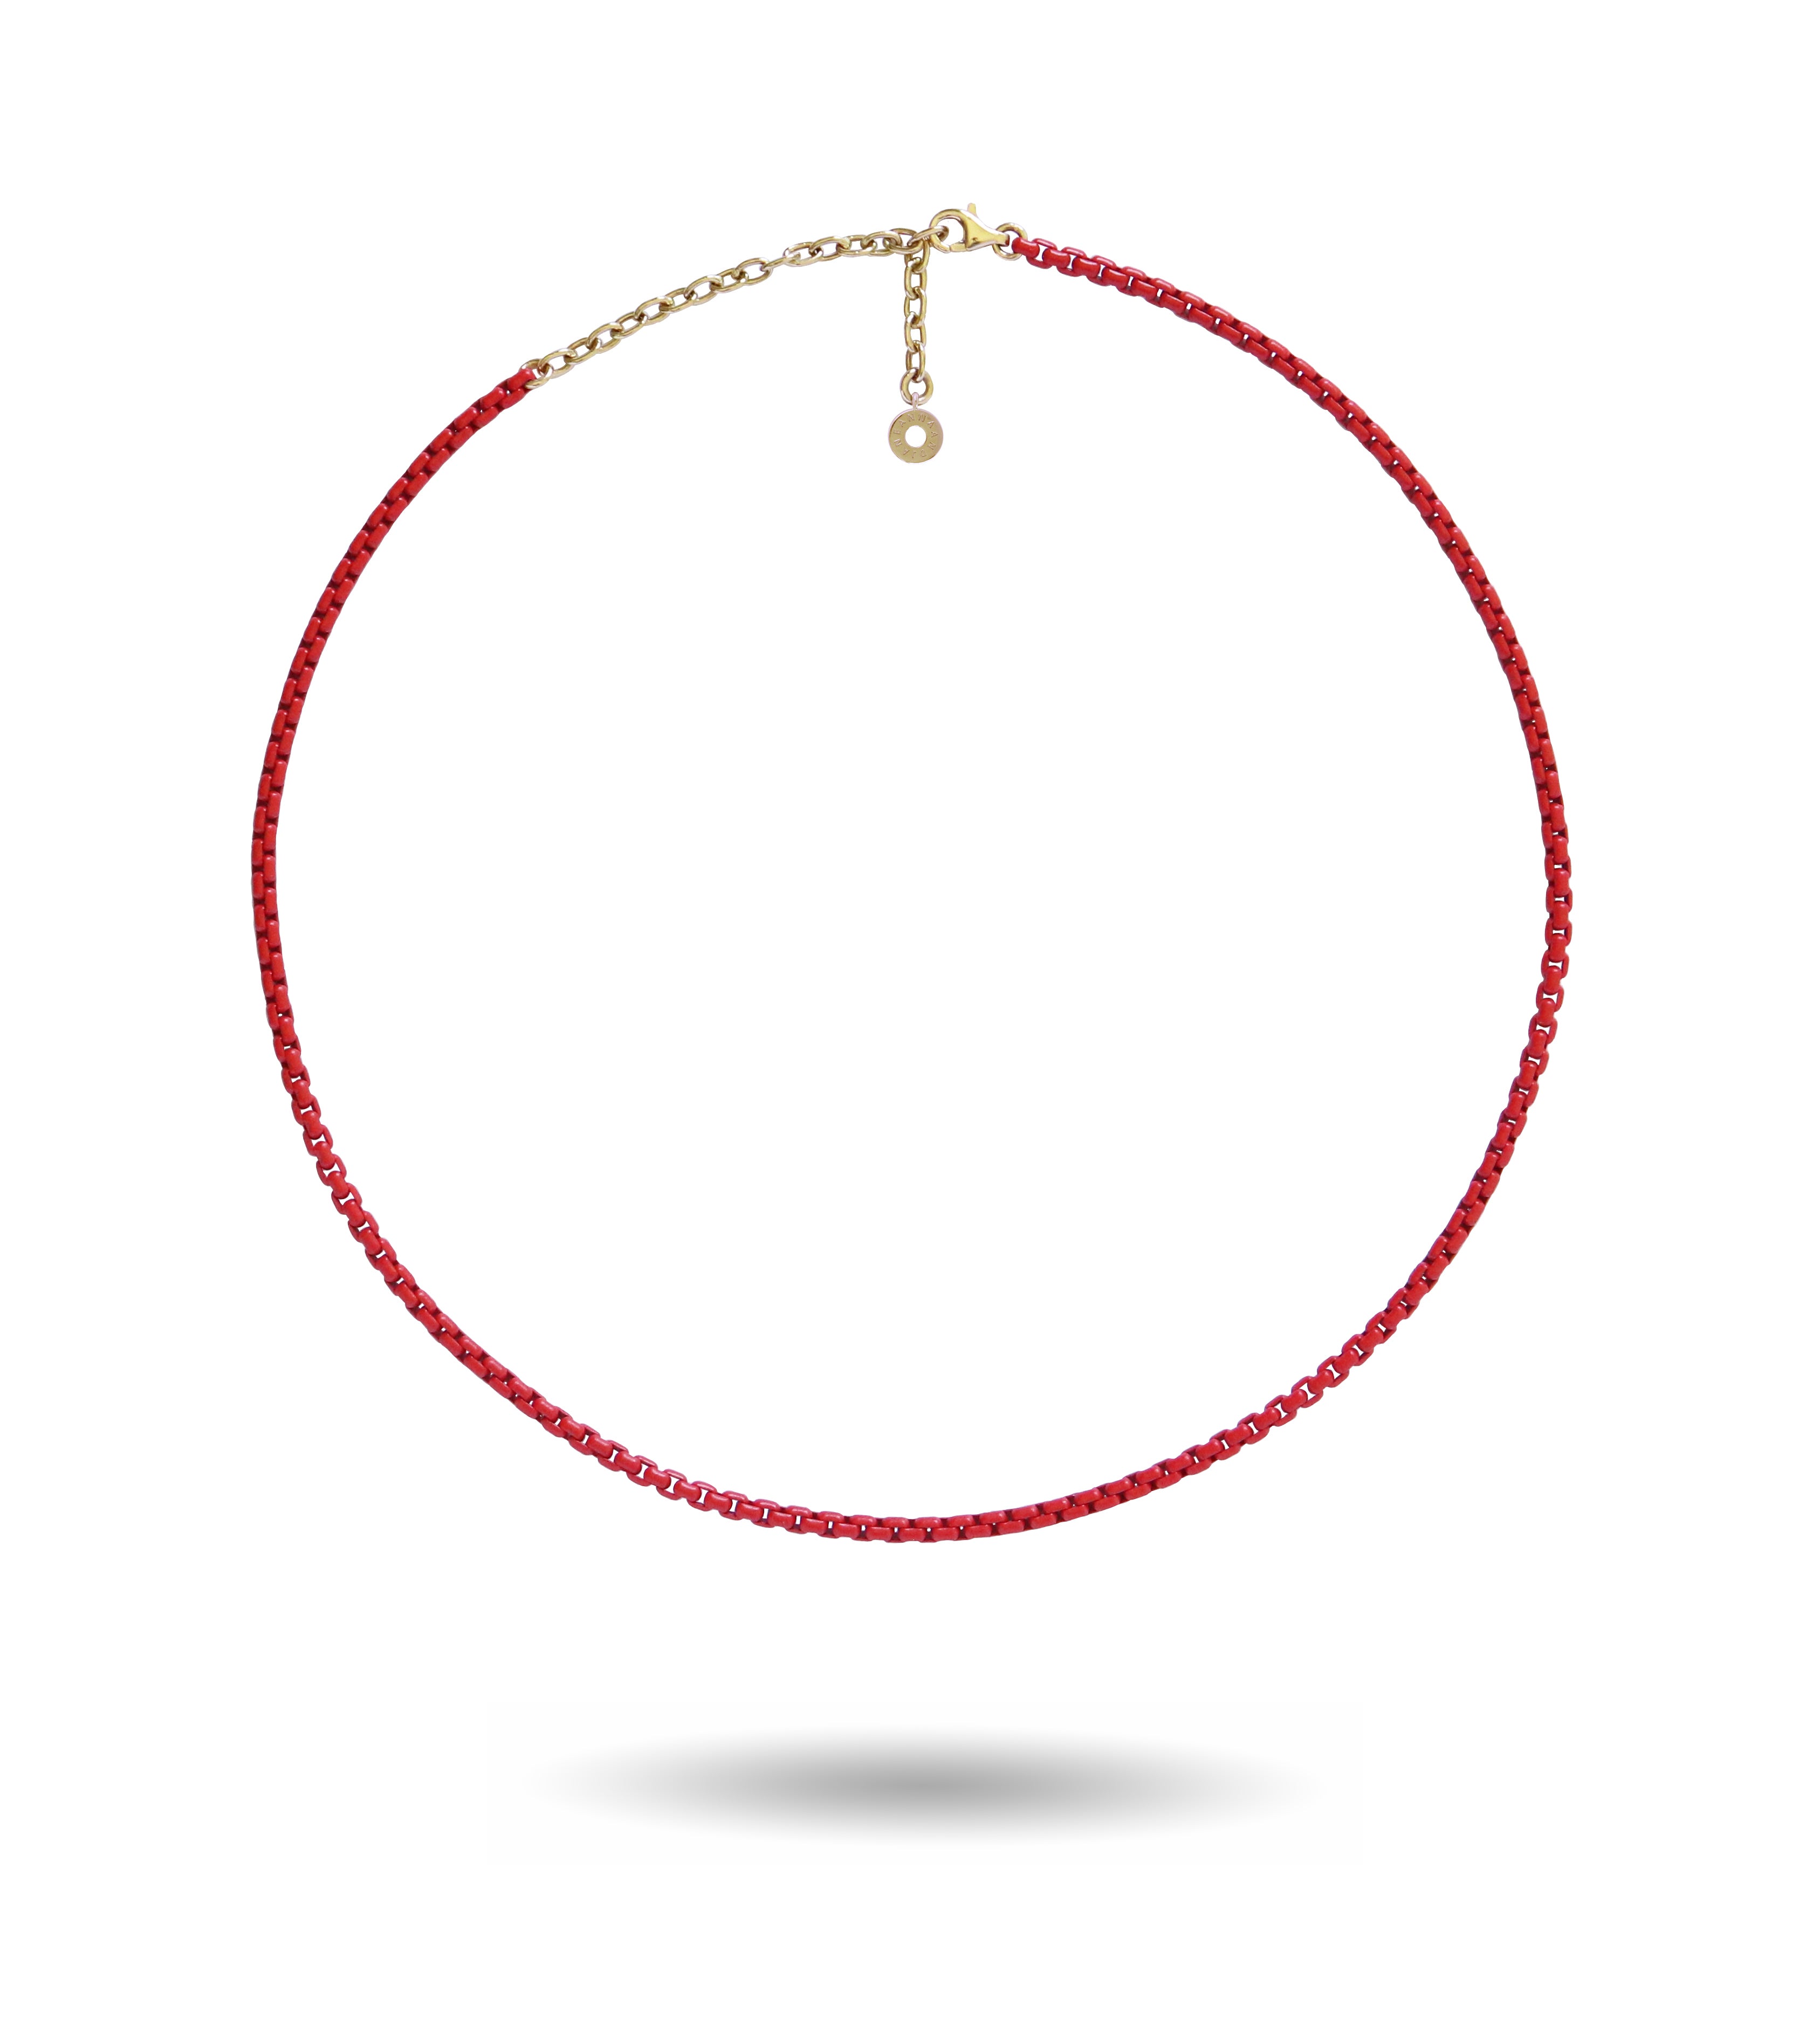 Lipstick Red Enamelled Chain Necklace with 18K Gold Accessories (Fine)